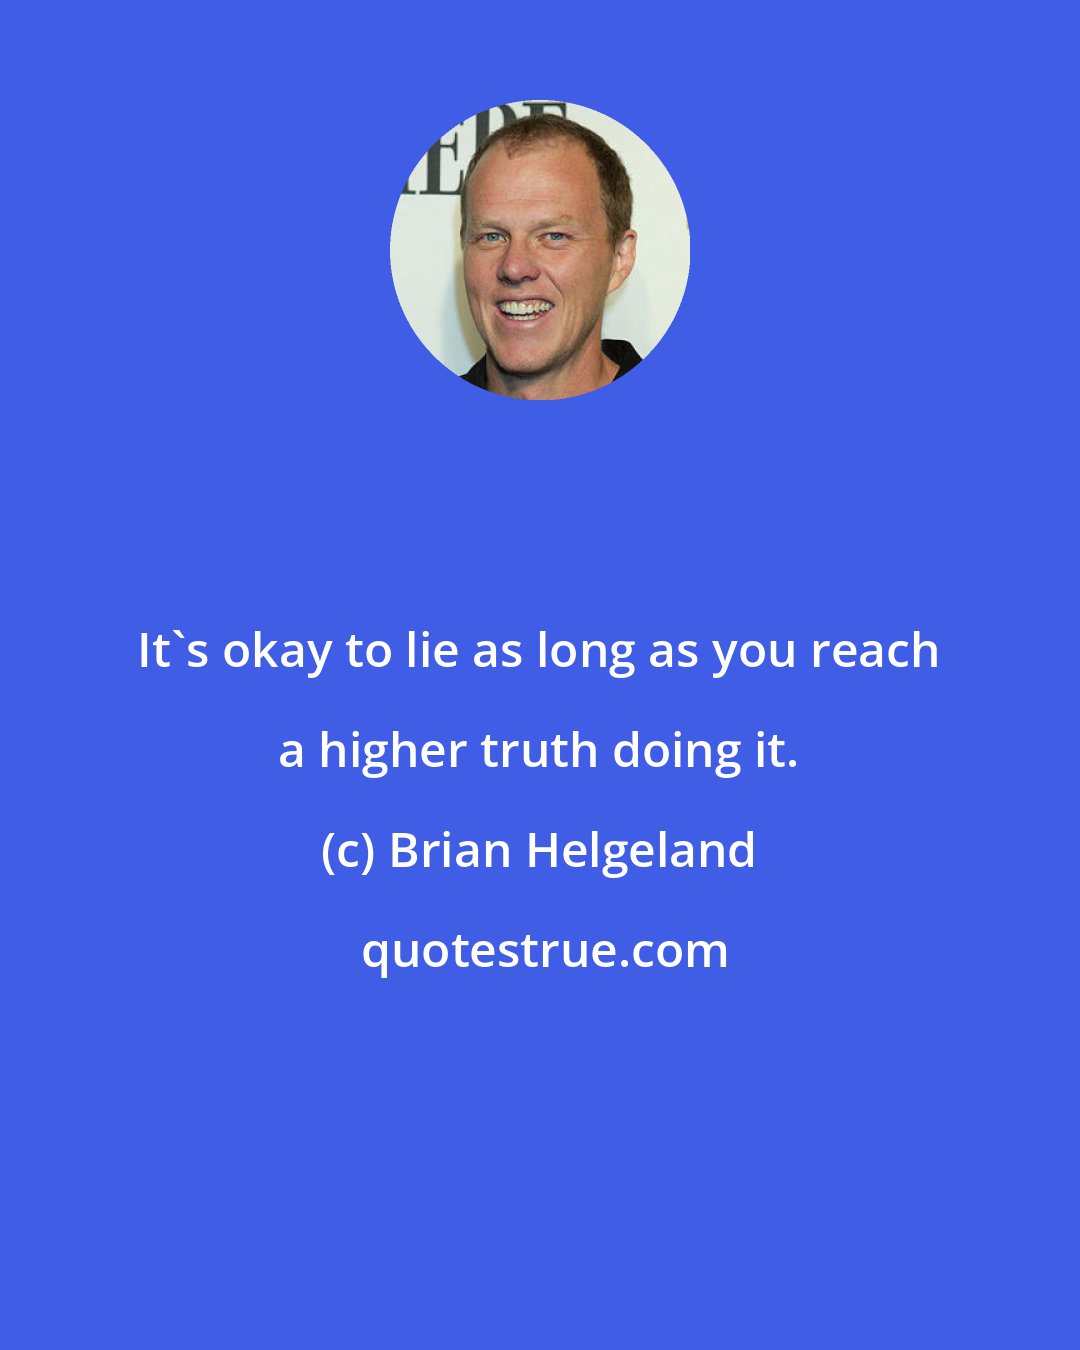 Brian Helgeland: It's okay to lie as long as you reach a higher truth doing it.